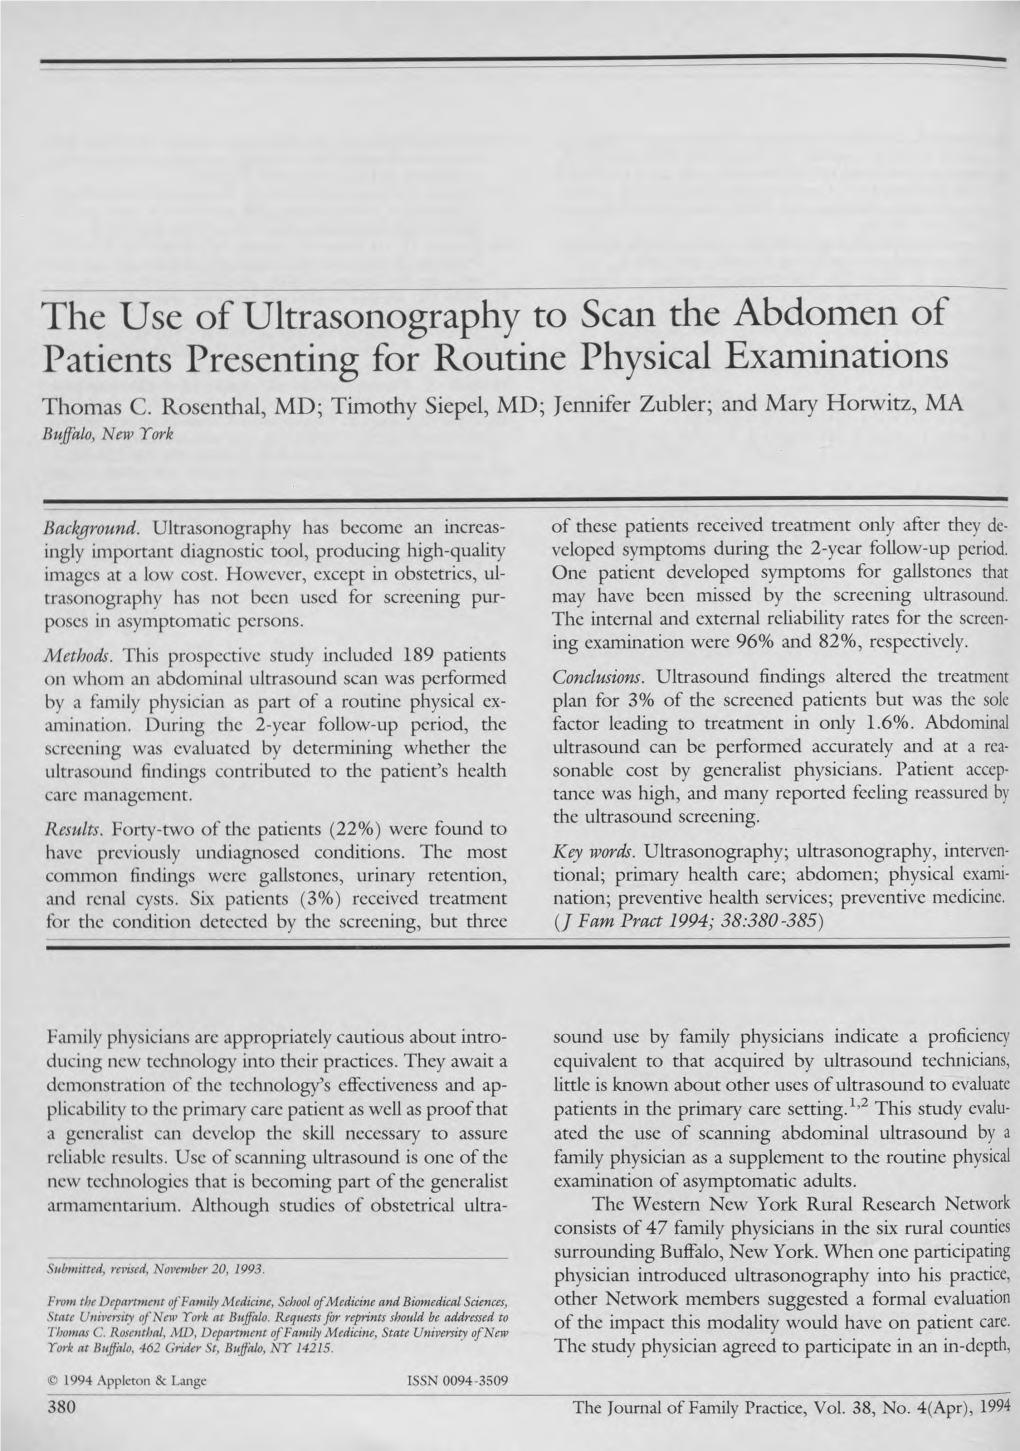 The Use of Ultrasonography to Scan the Abdomen of Patients Presenting for Routine Physical Examinations Thomas C